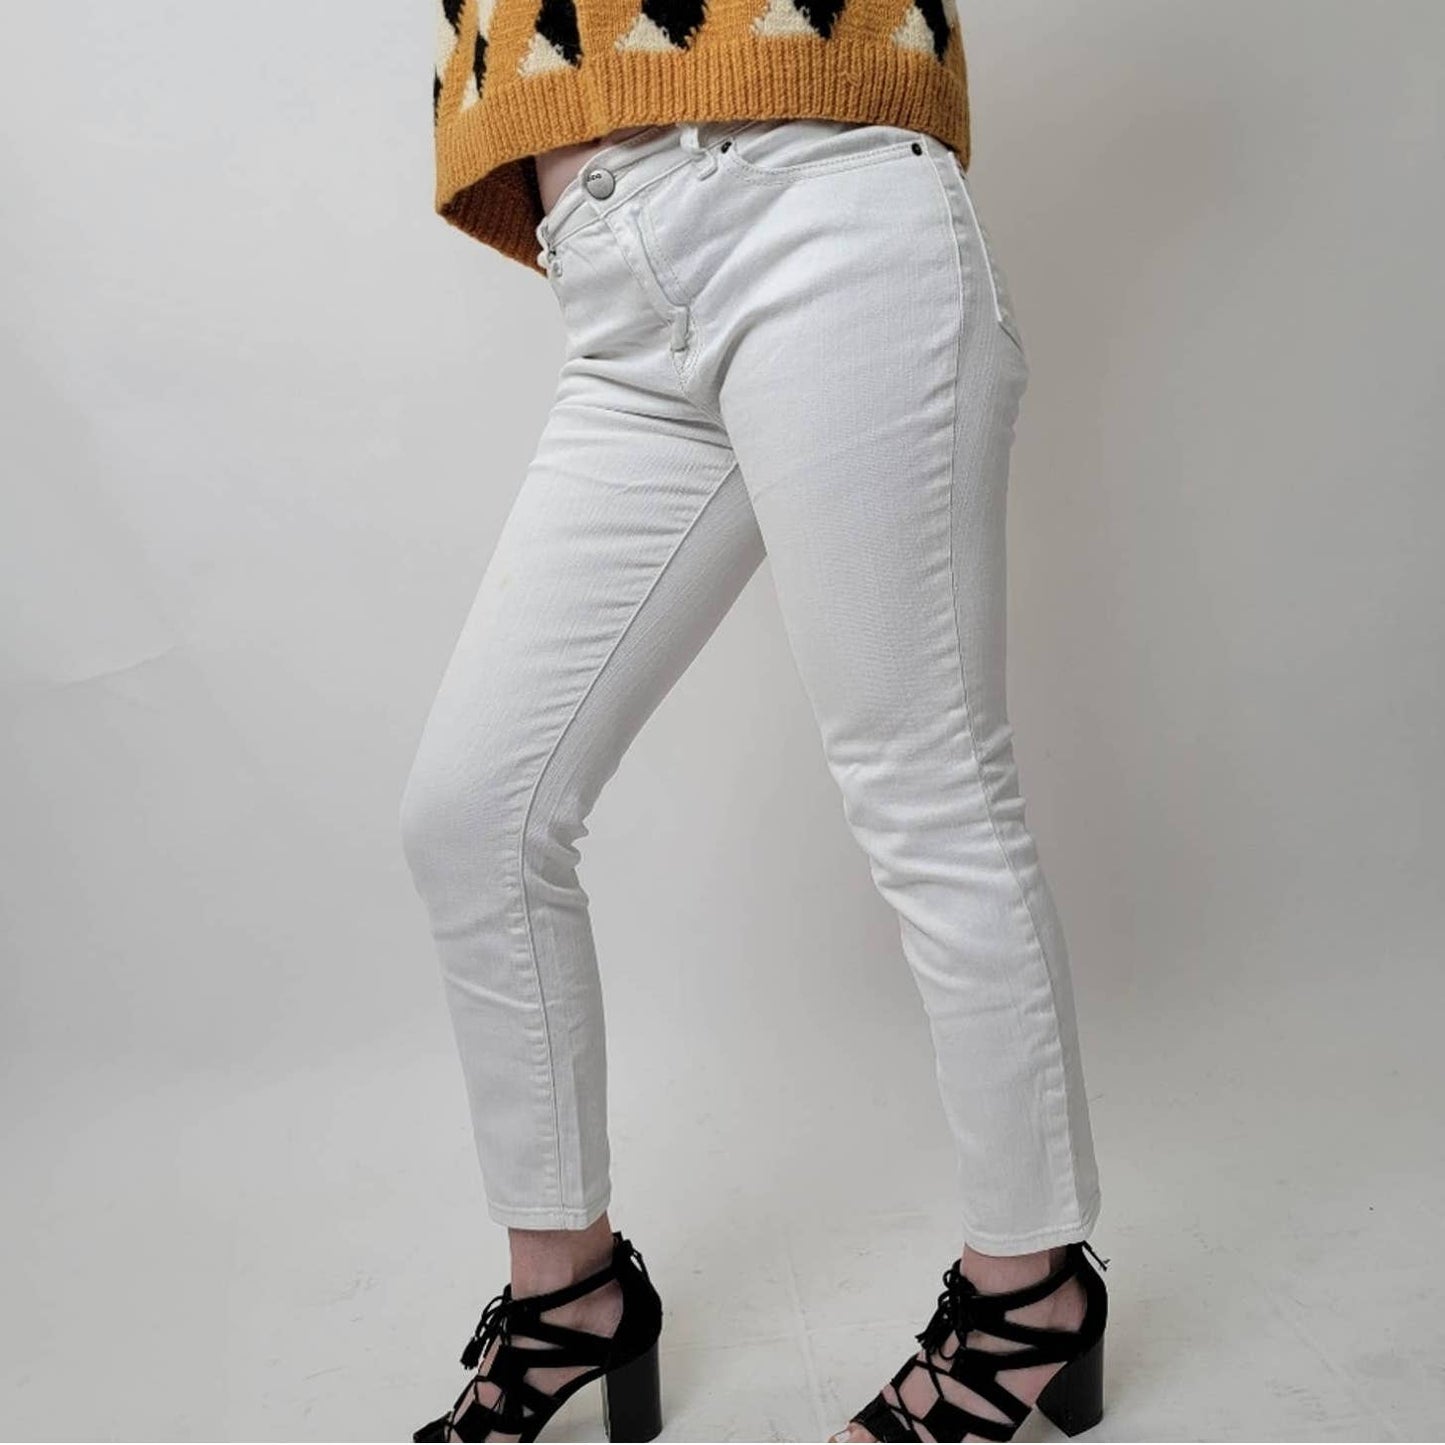 Urban Outfitters BDG High Rise Grazer Cigarette White Skinny Jeans - 28